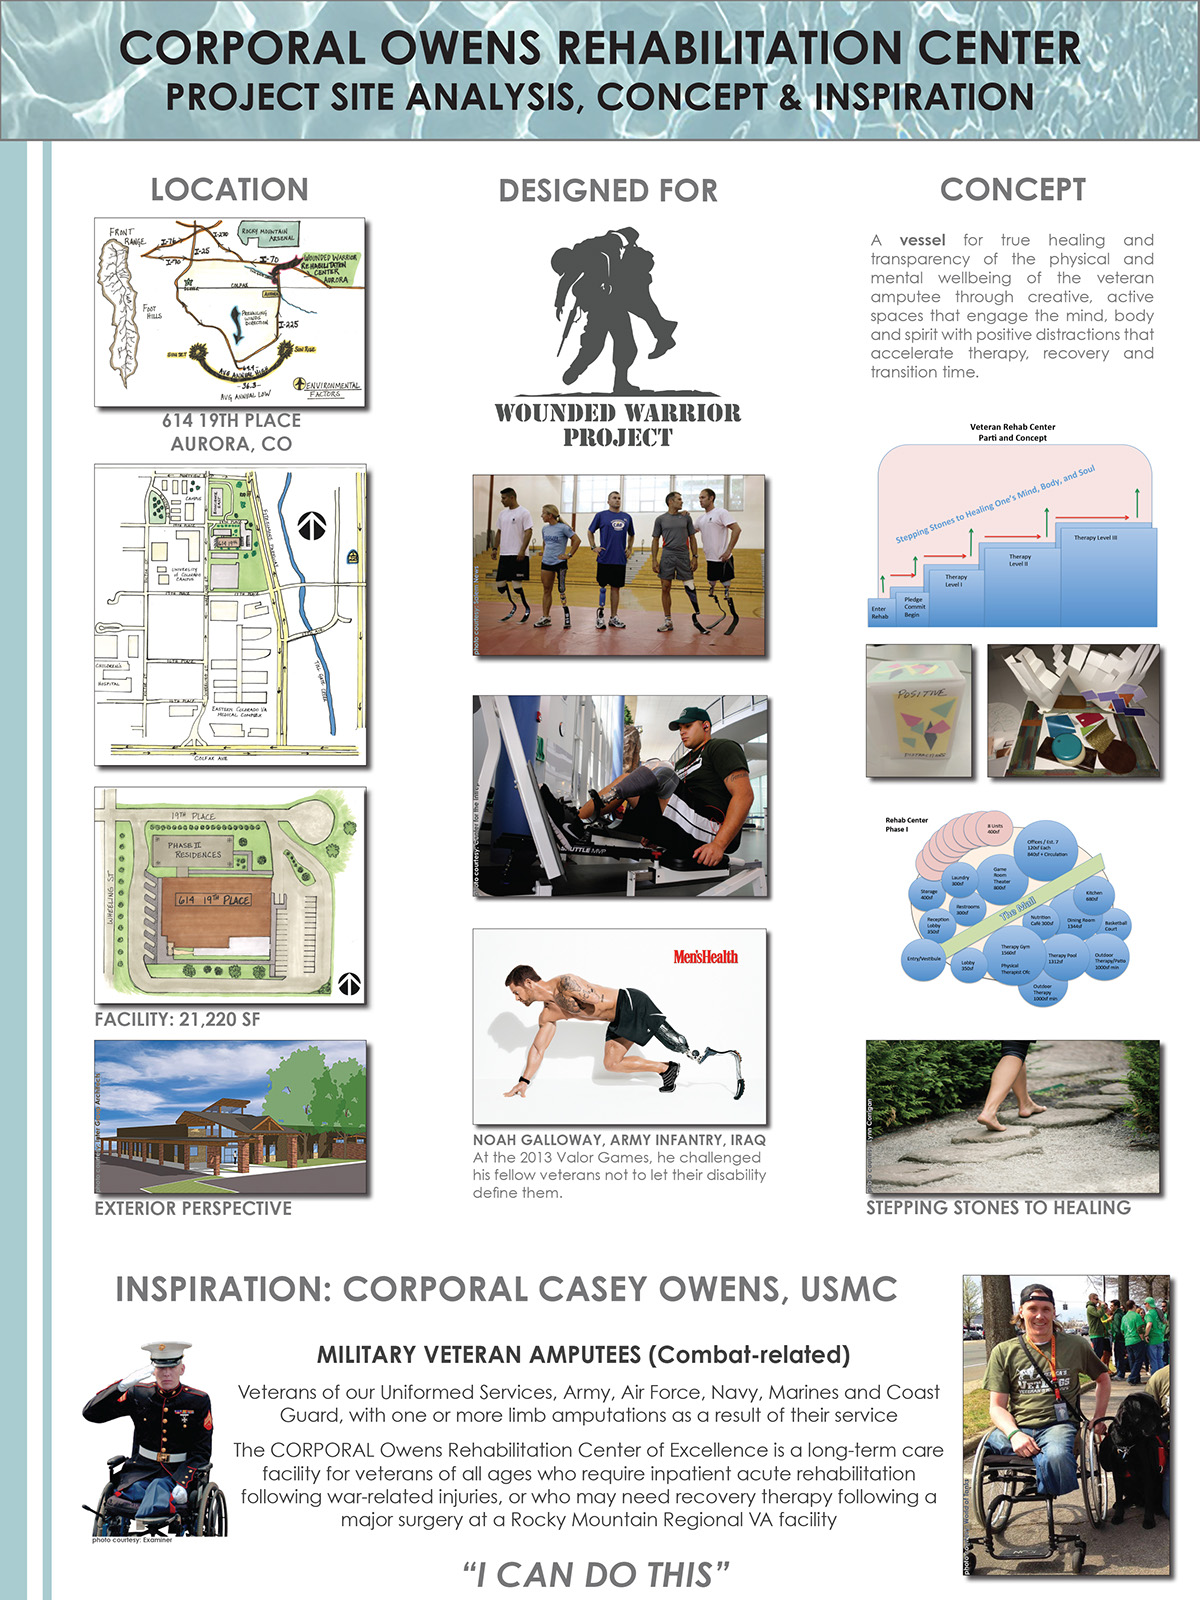 rehabilitation center veterans Wounded Warrior Project Capstone project